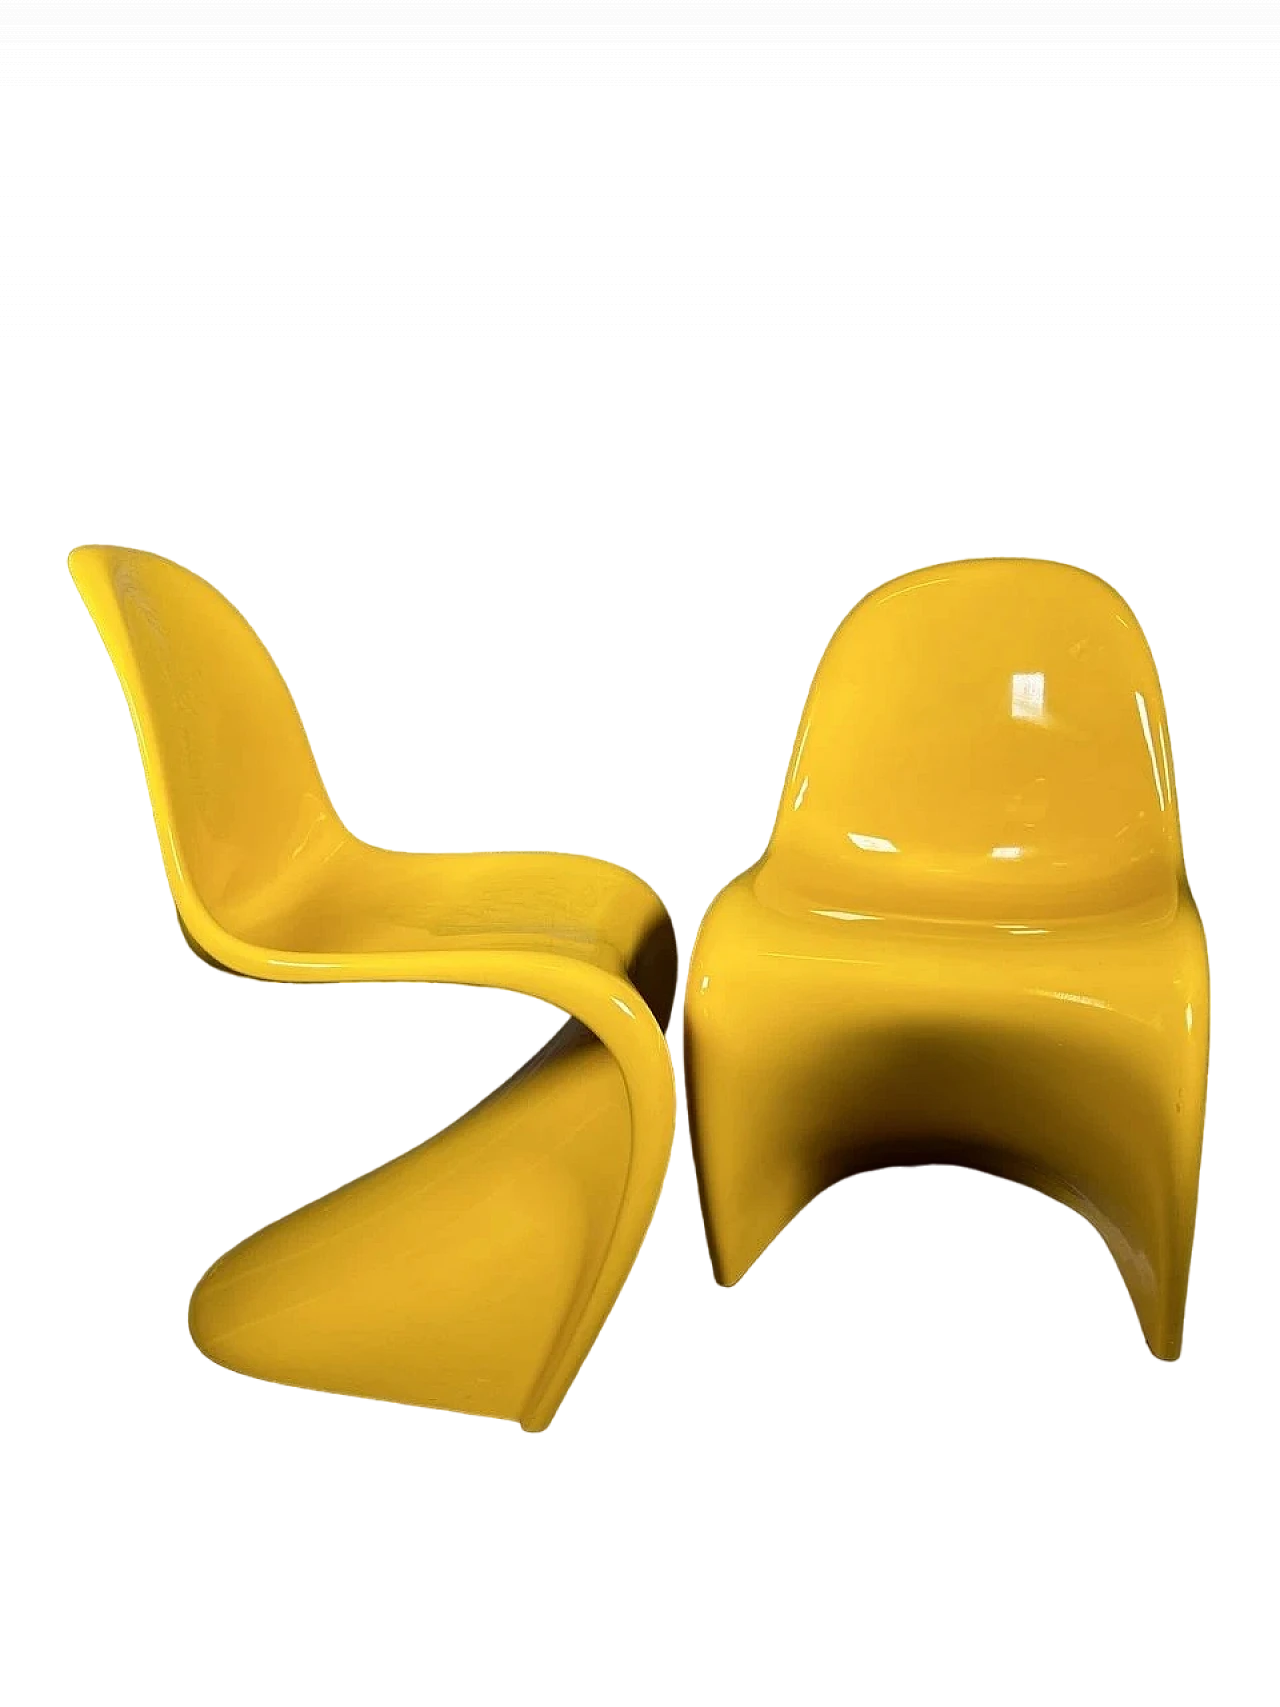 Pair of Pantor Classic Chair S chairs by Panton for Vitra, 1990s 17